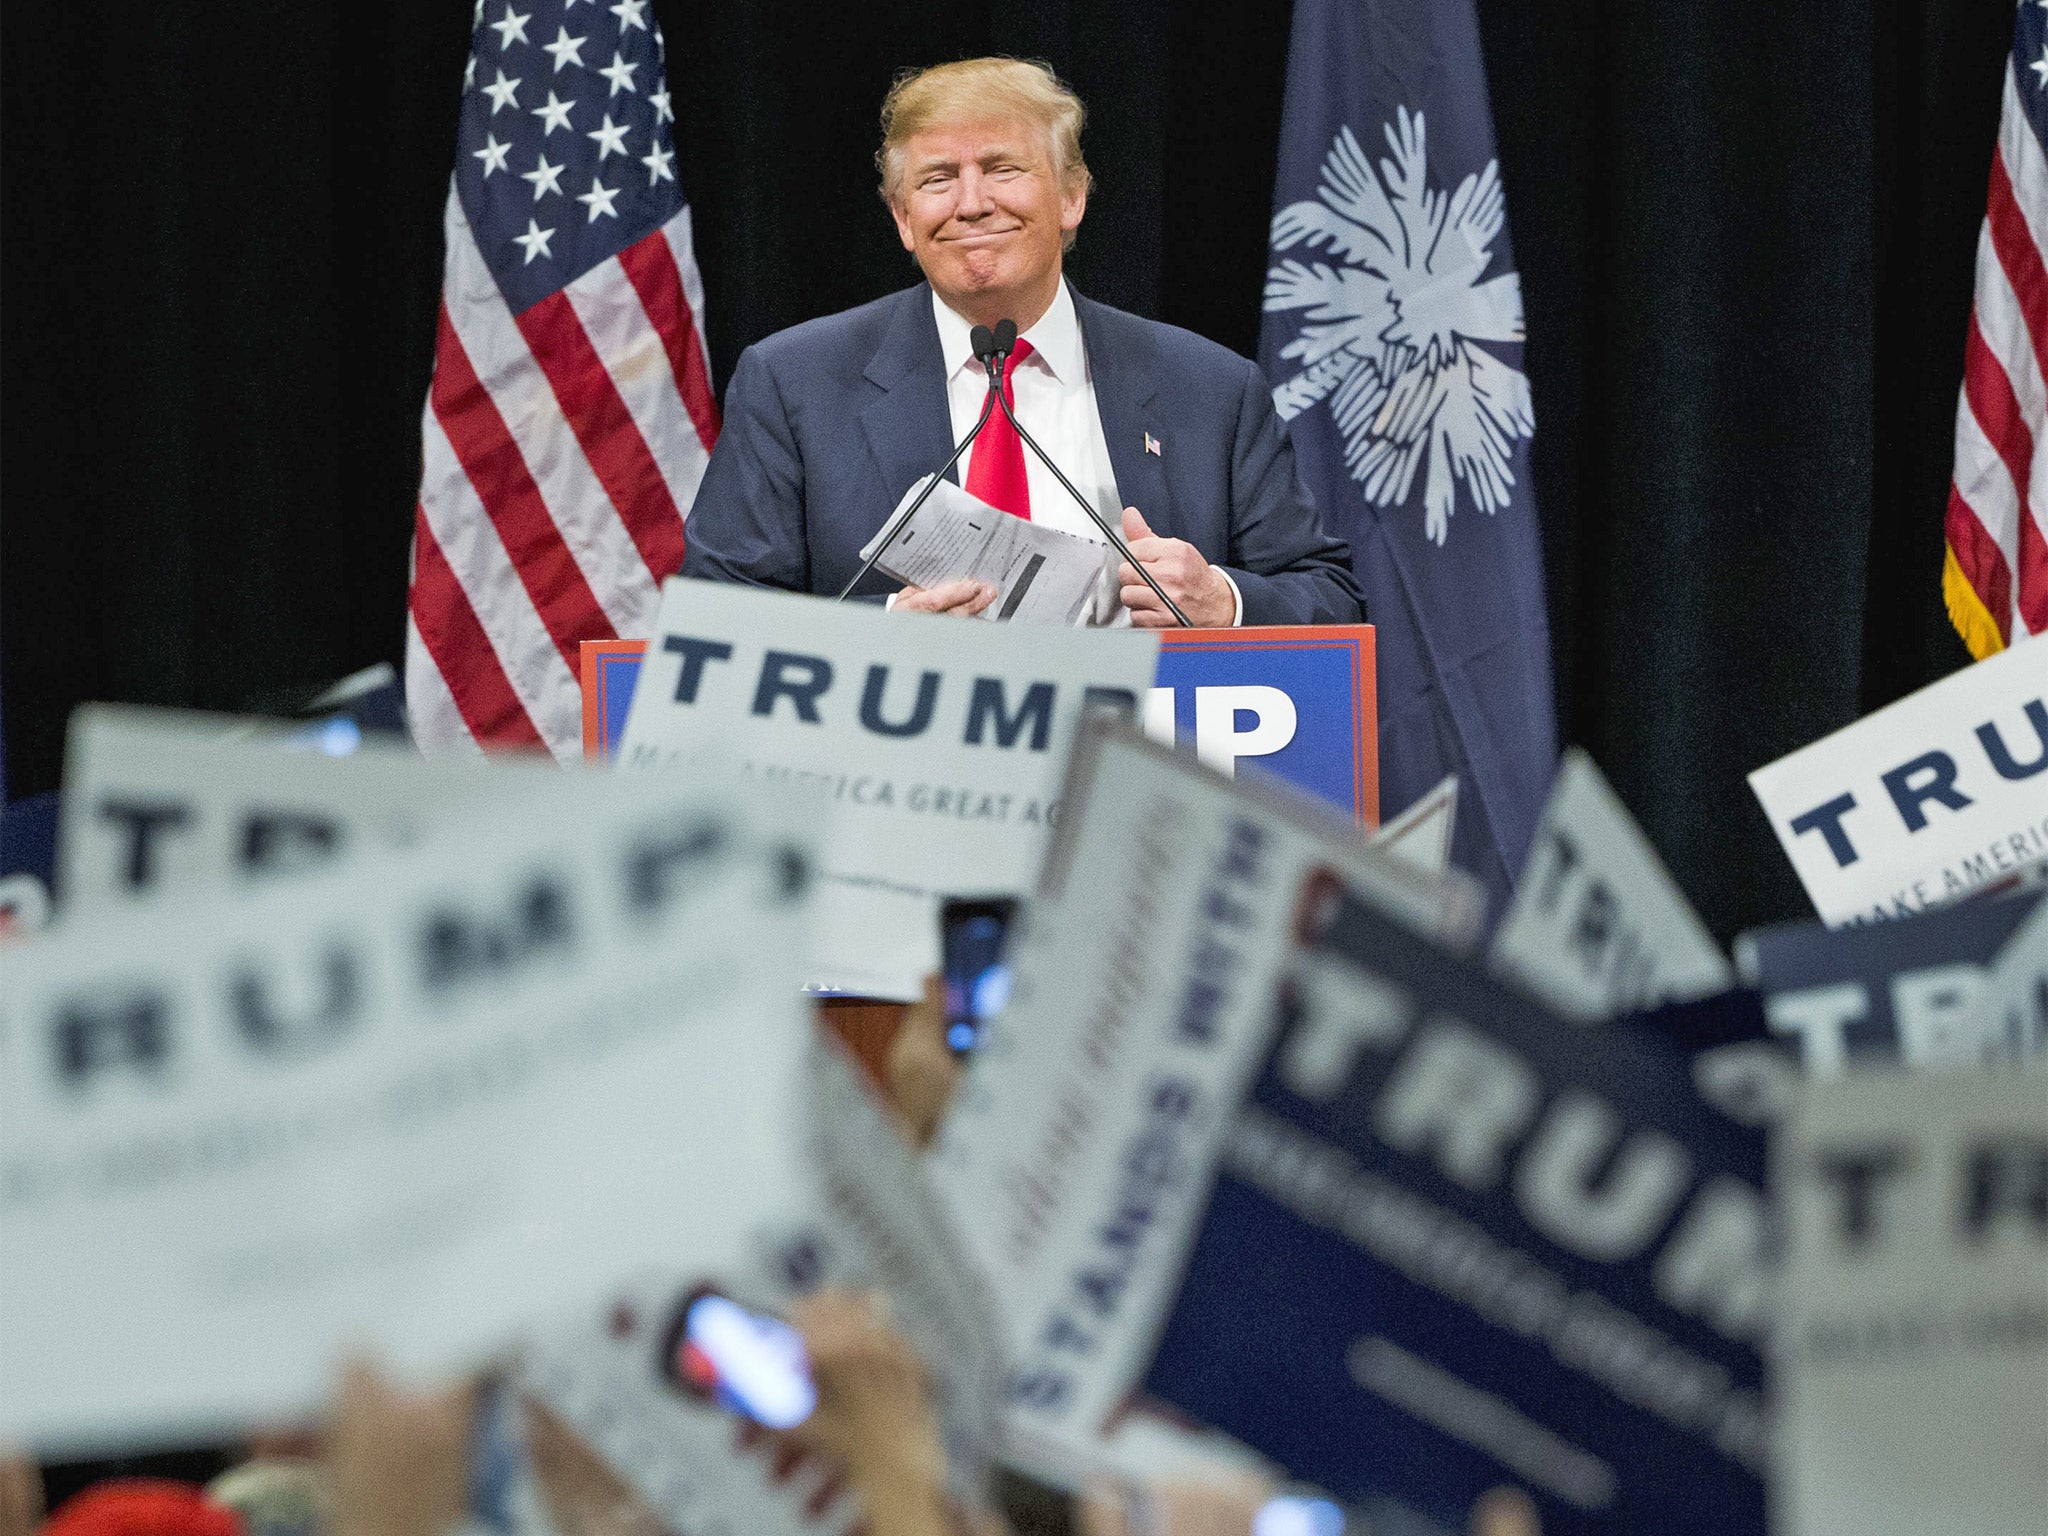 Republican presidential candidate Donald Trump on the campaign trail in Myrtle Beach